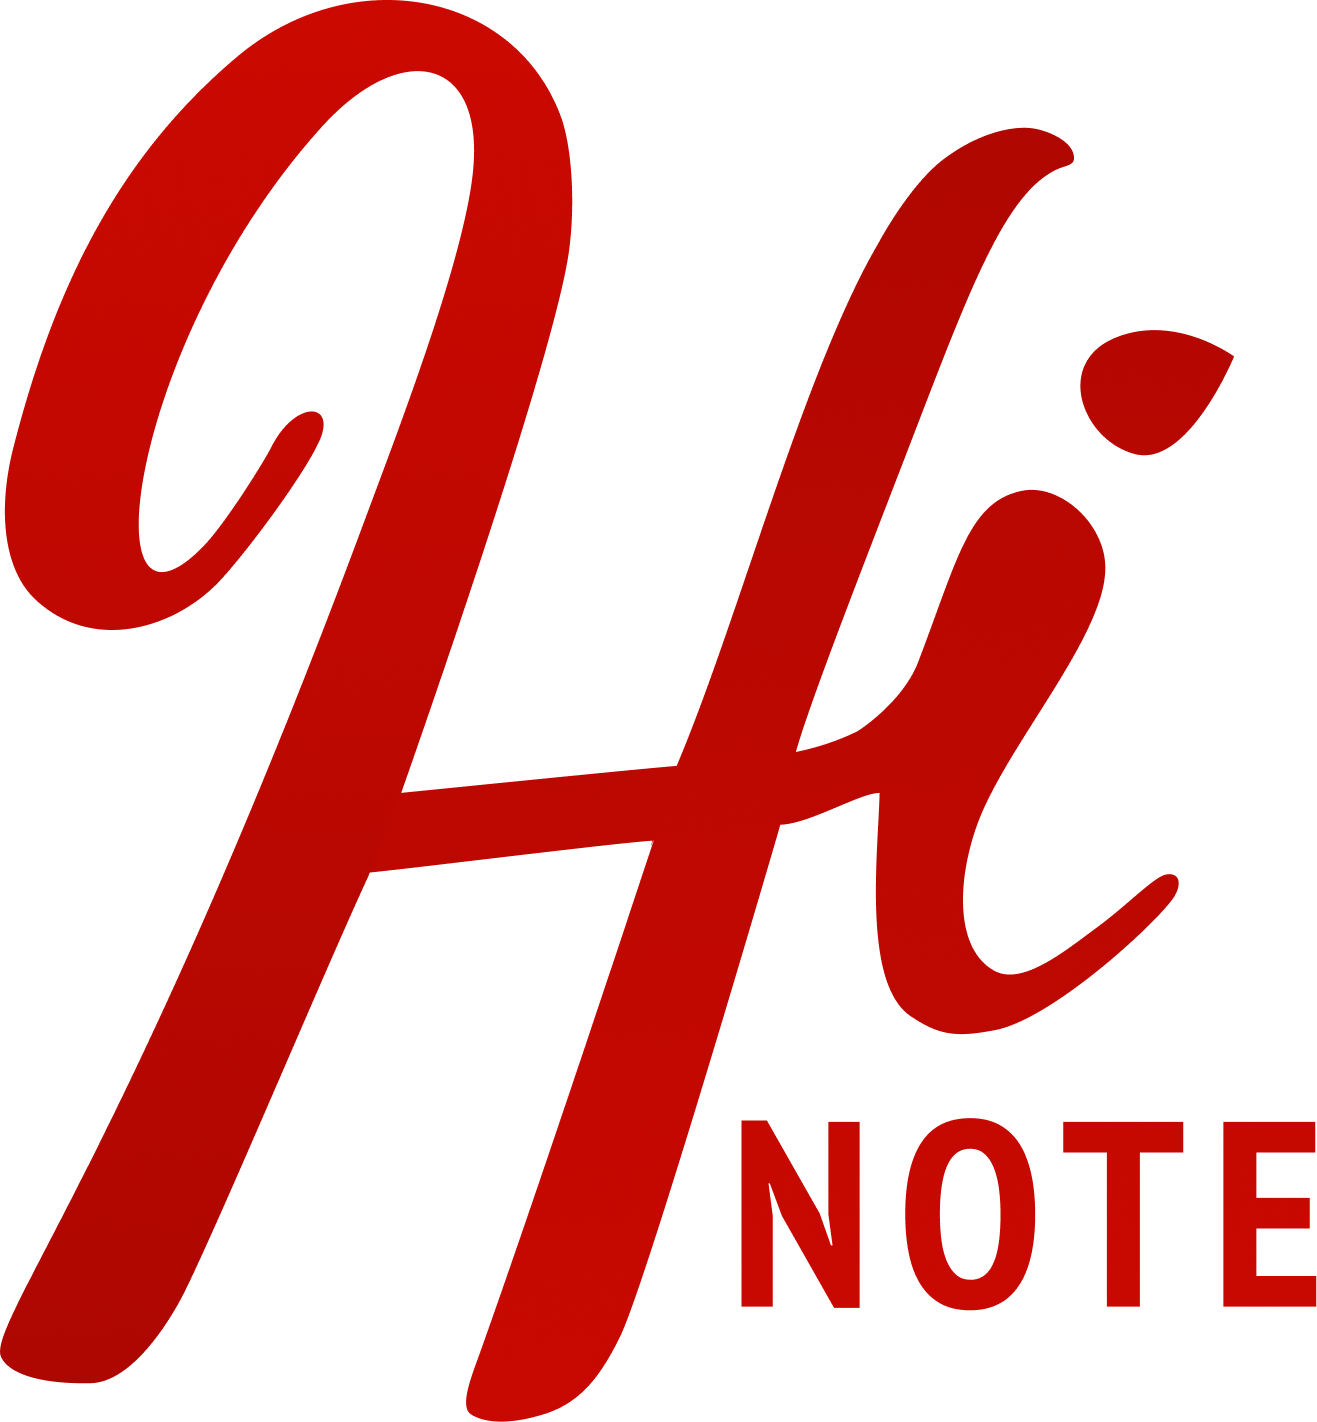 HiNOTE, Send Your Best Logo in Red